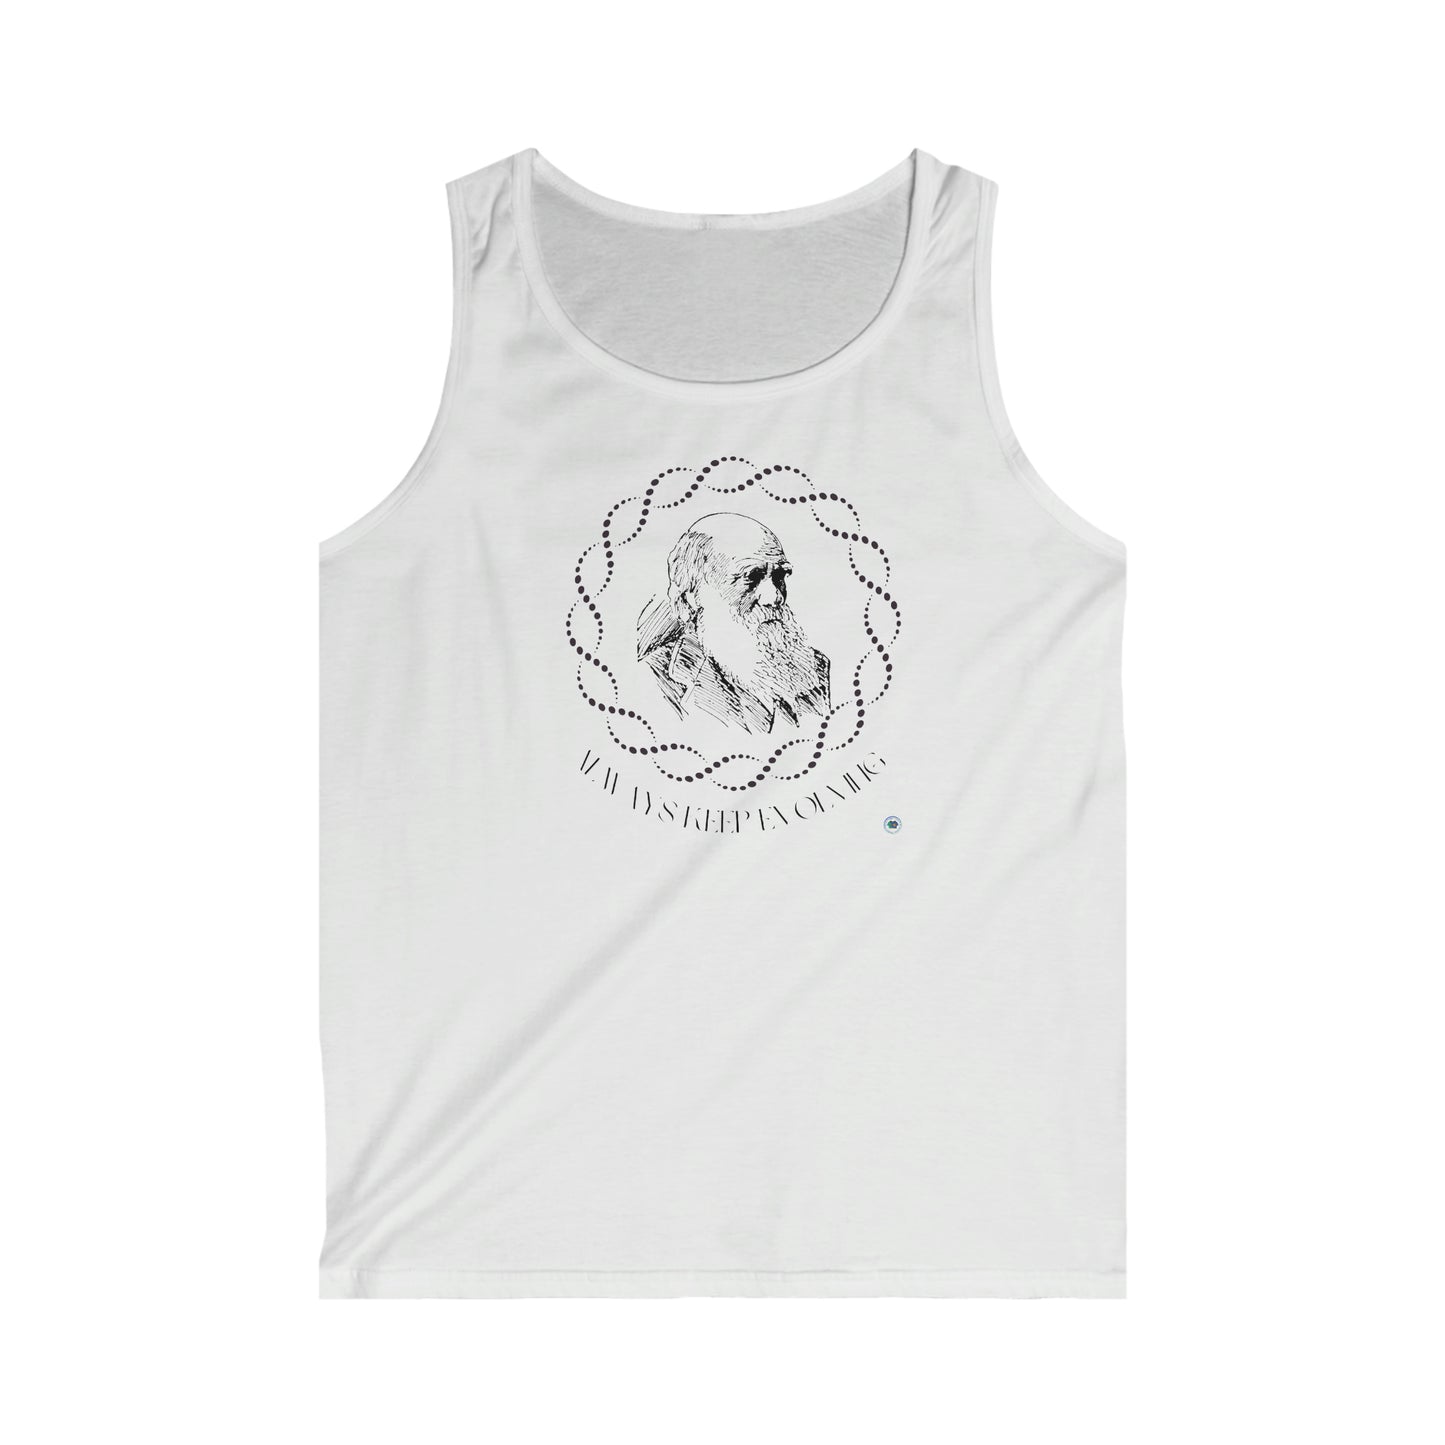 ‘Always keep Evolving’  Men's Softstyle Tank Top